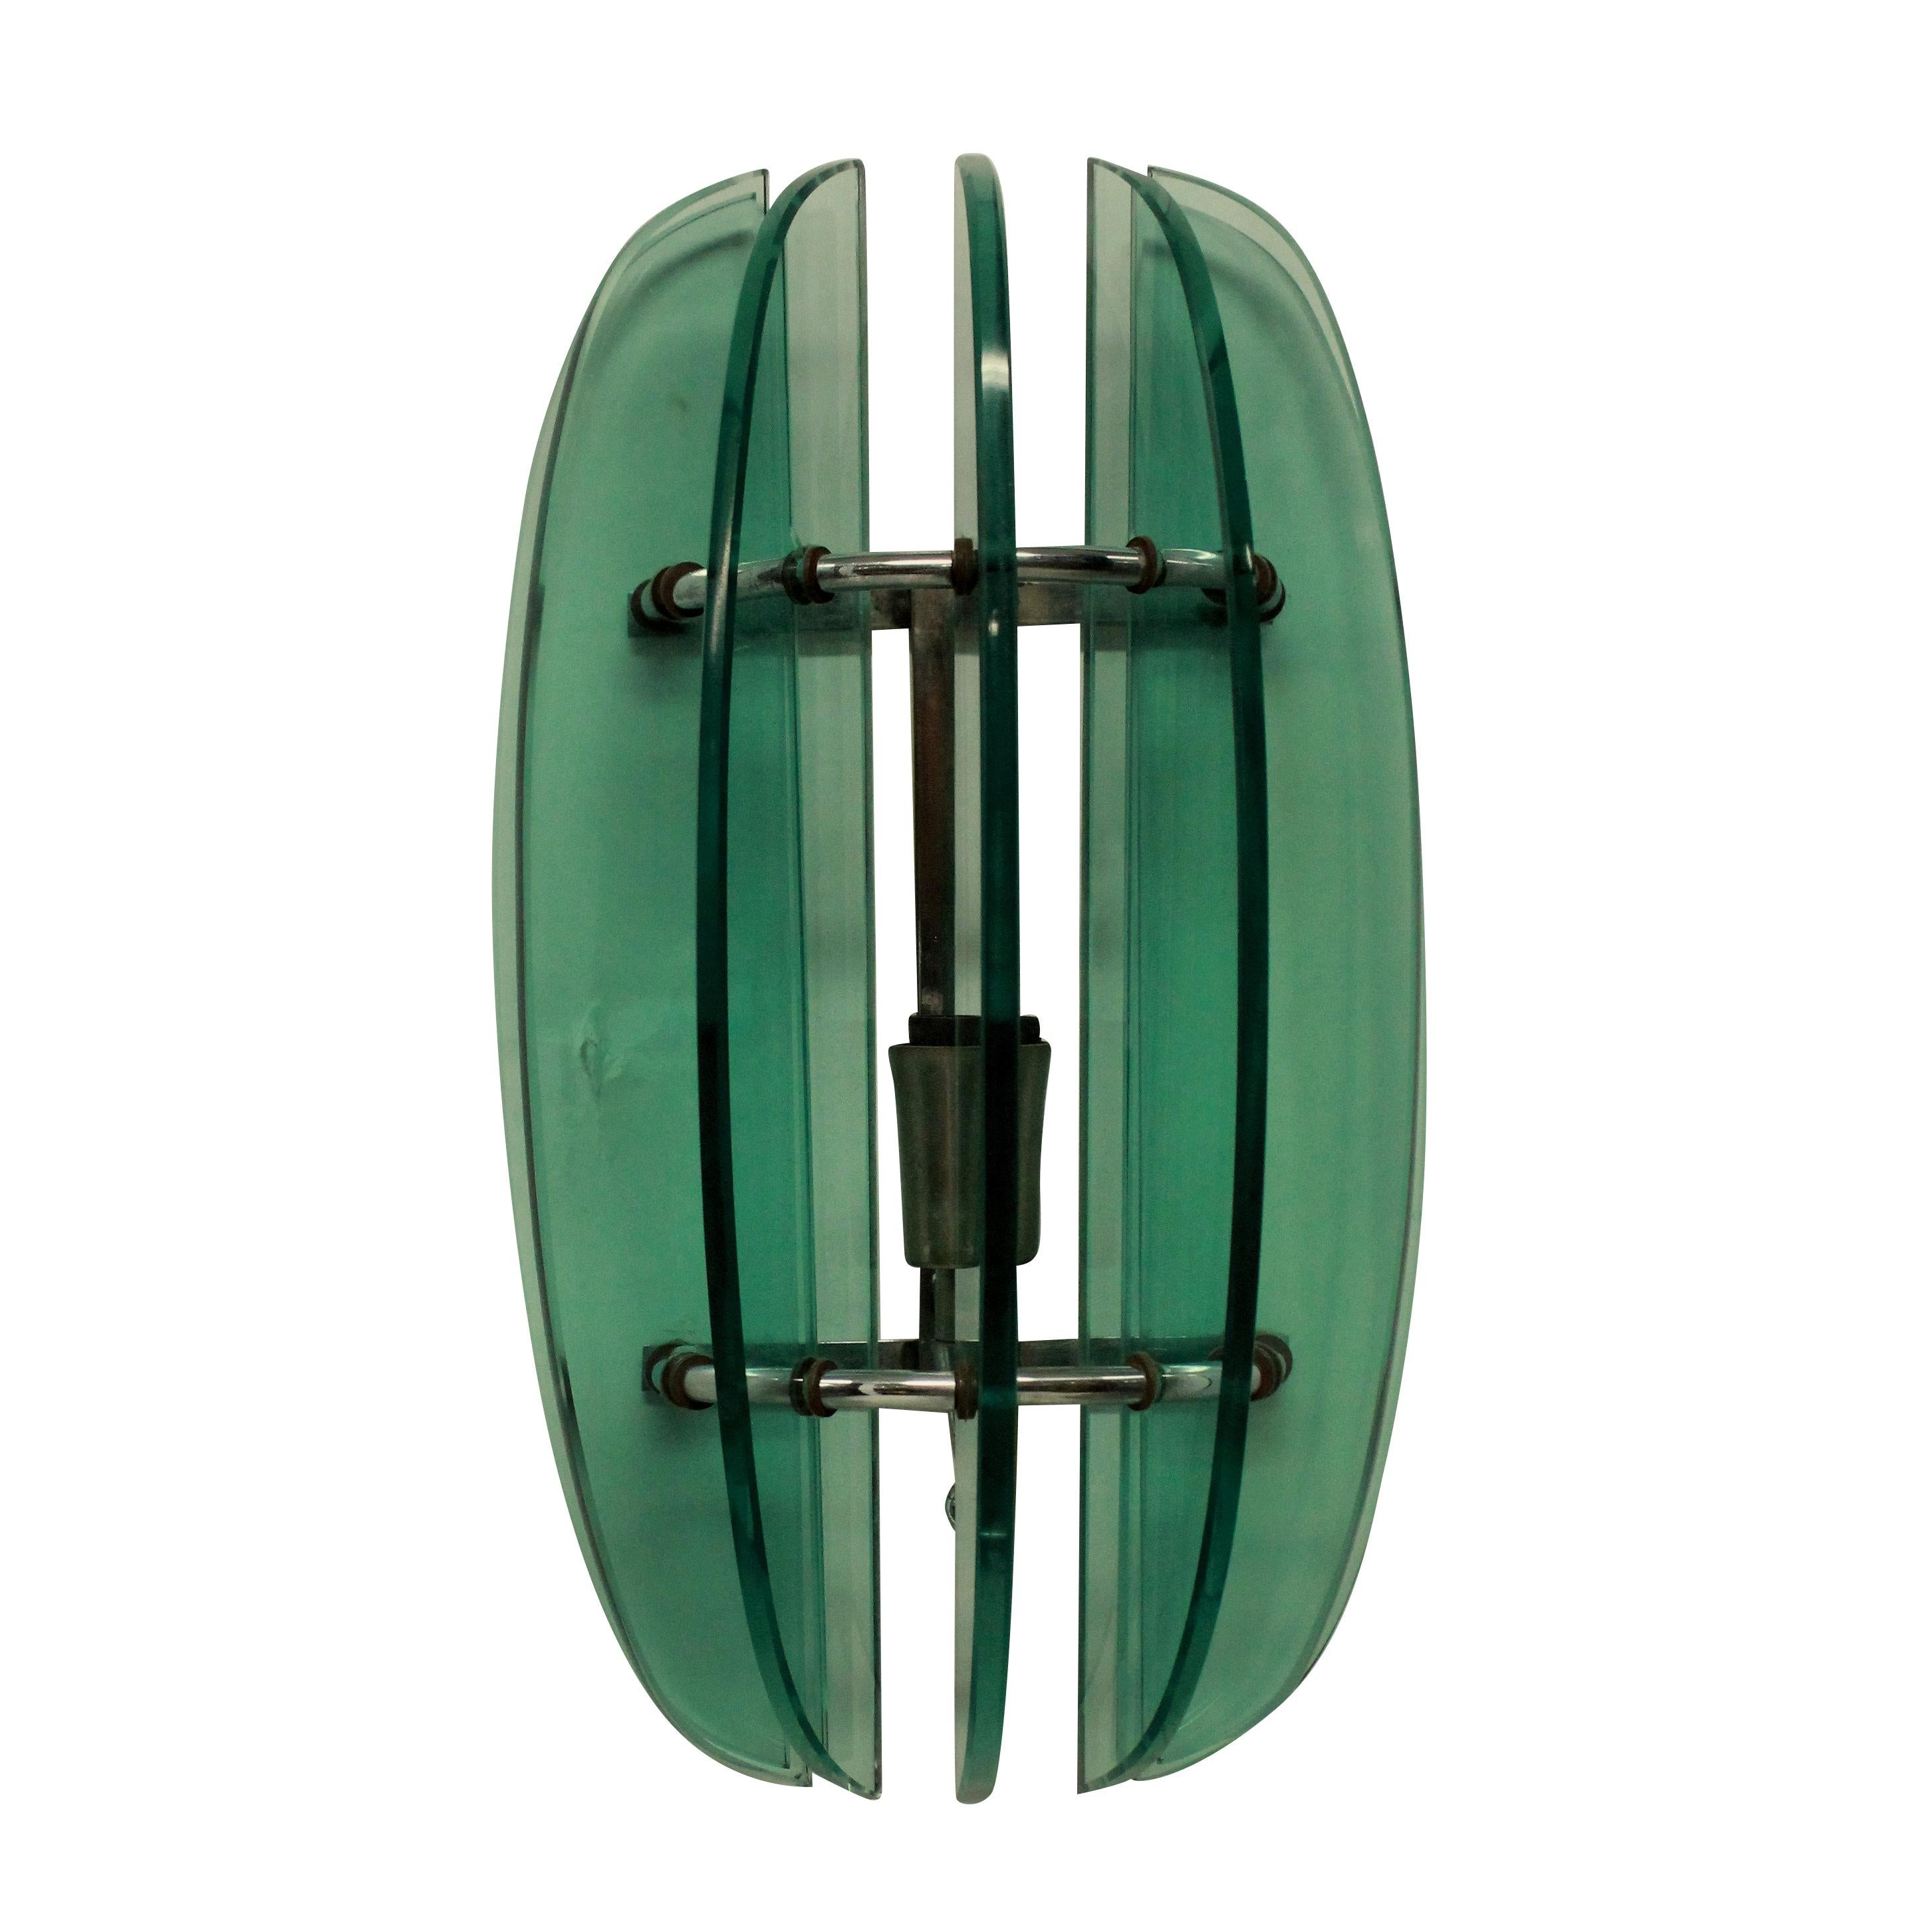 A pair of Italian midcentury green glass wall lights by Veca.